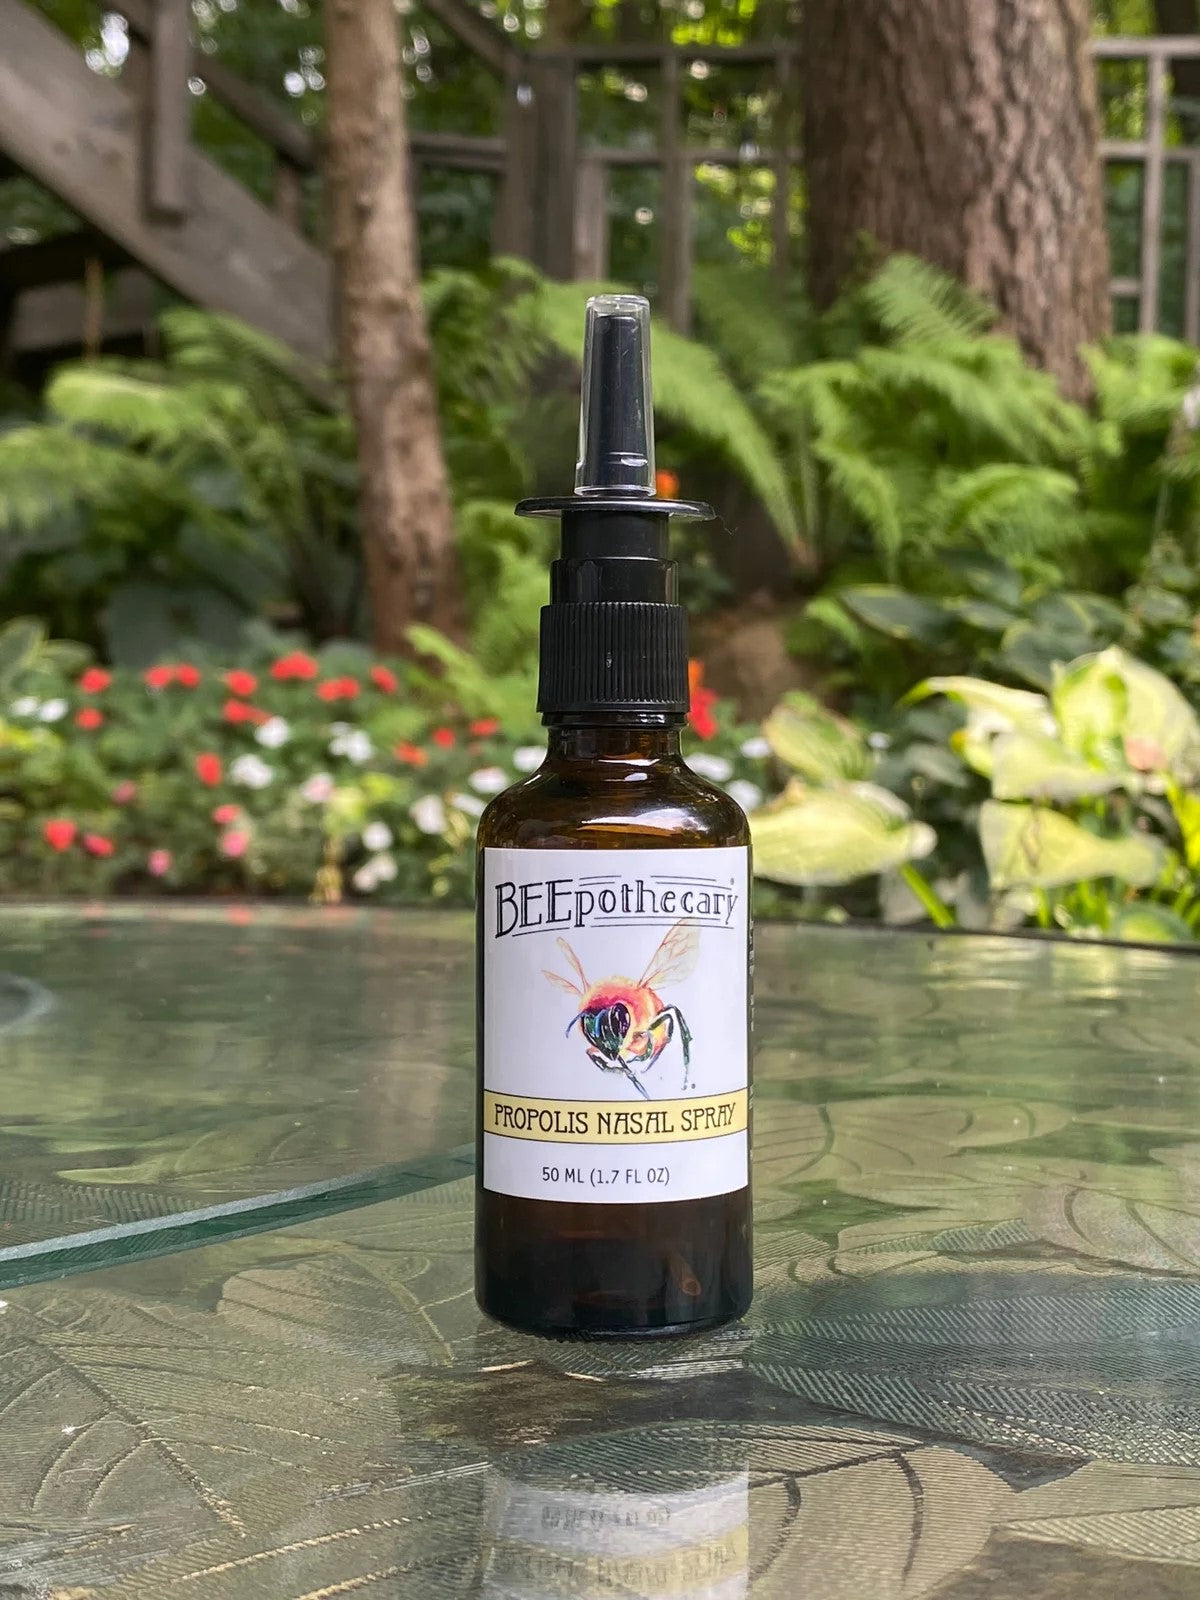 BEEpothecary propolis nasal spray 50 ml brown bottle with white label